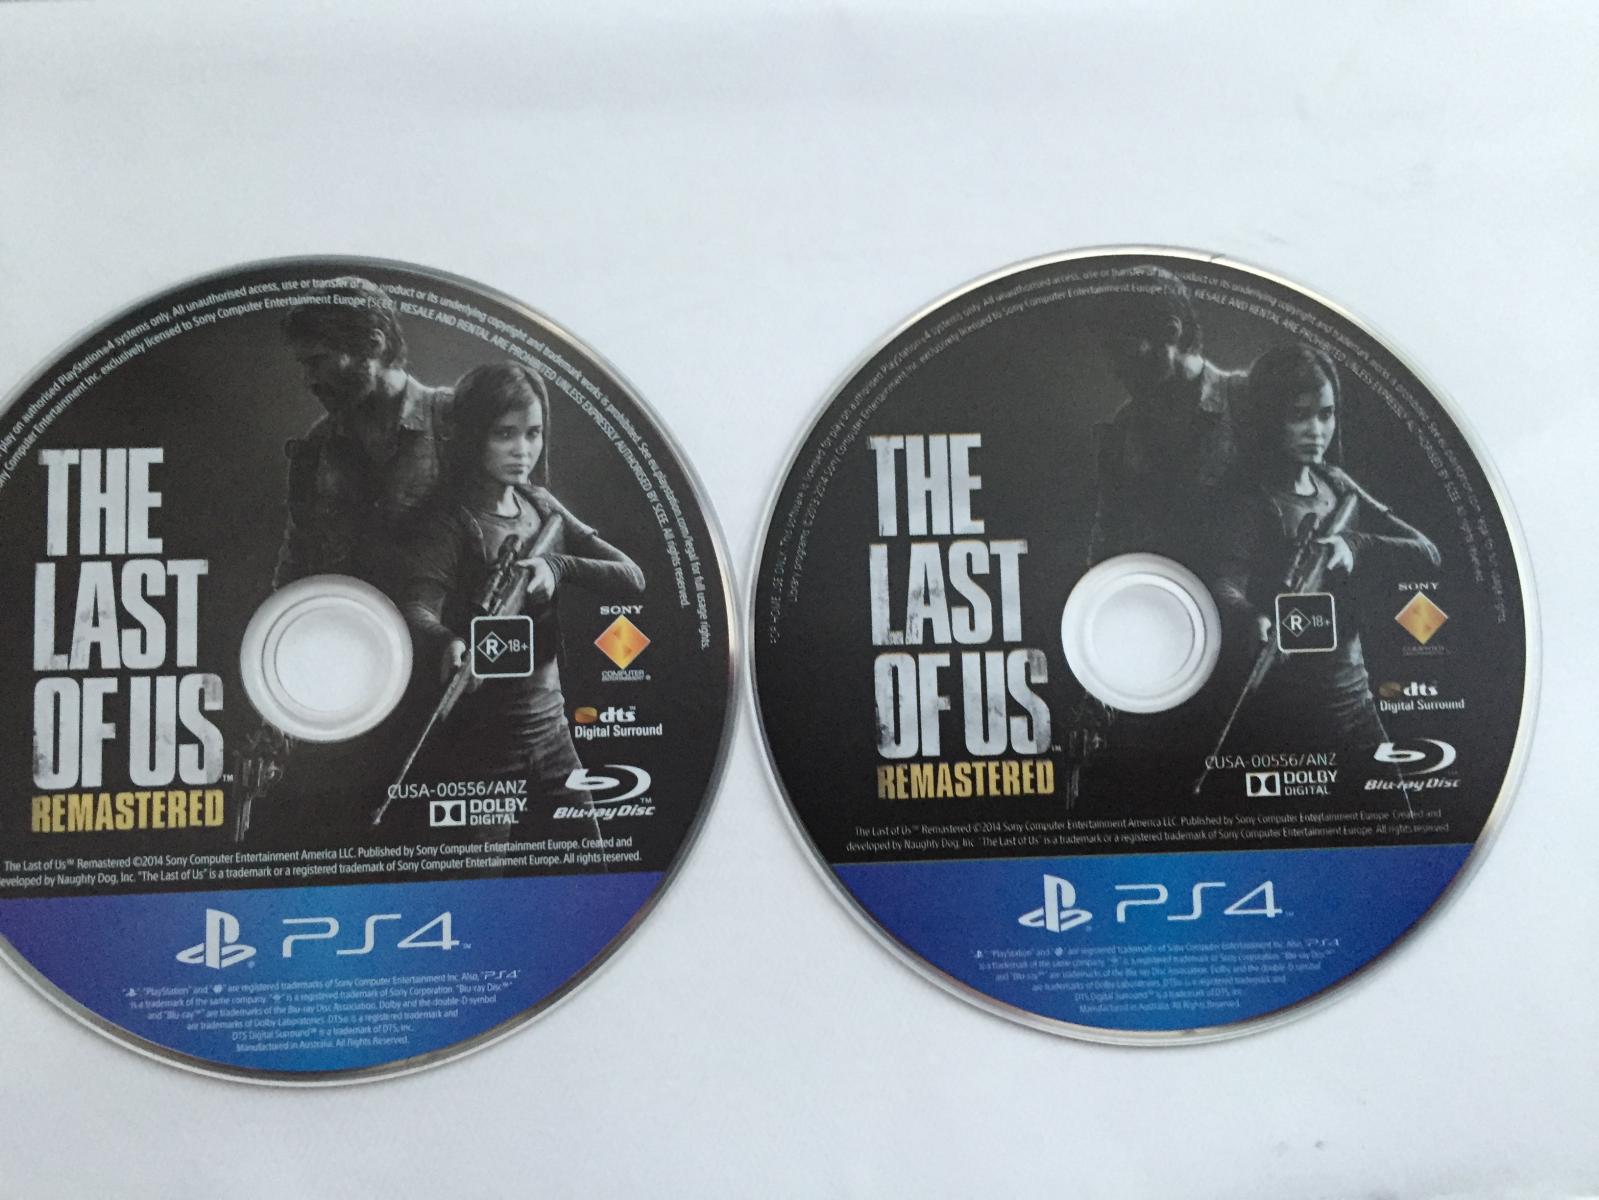 Is this PS4 Disc fake?